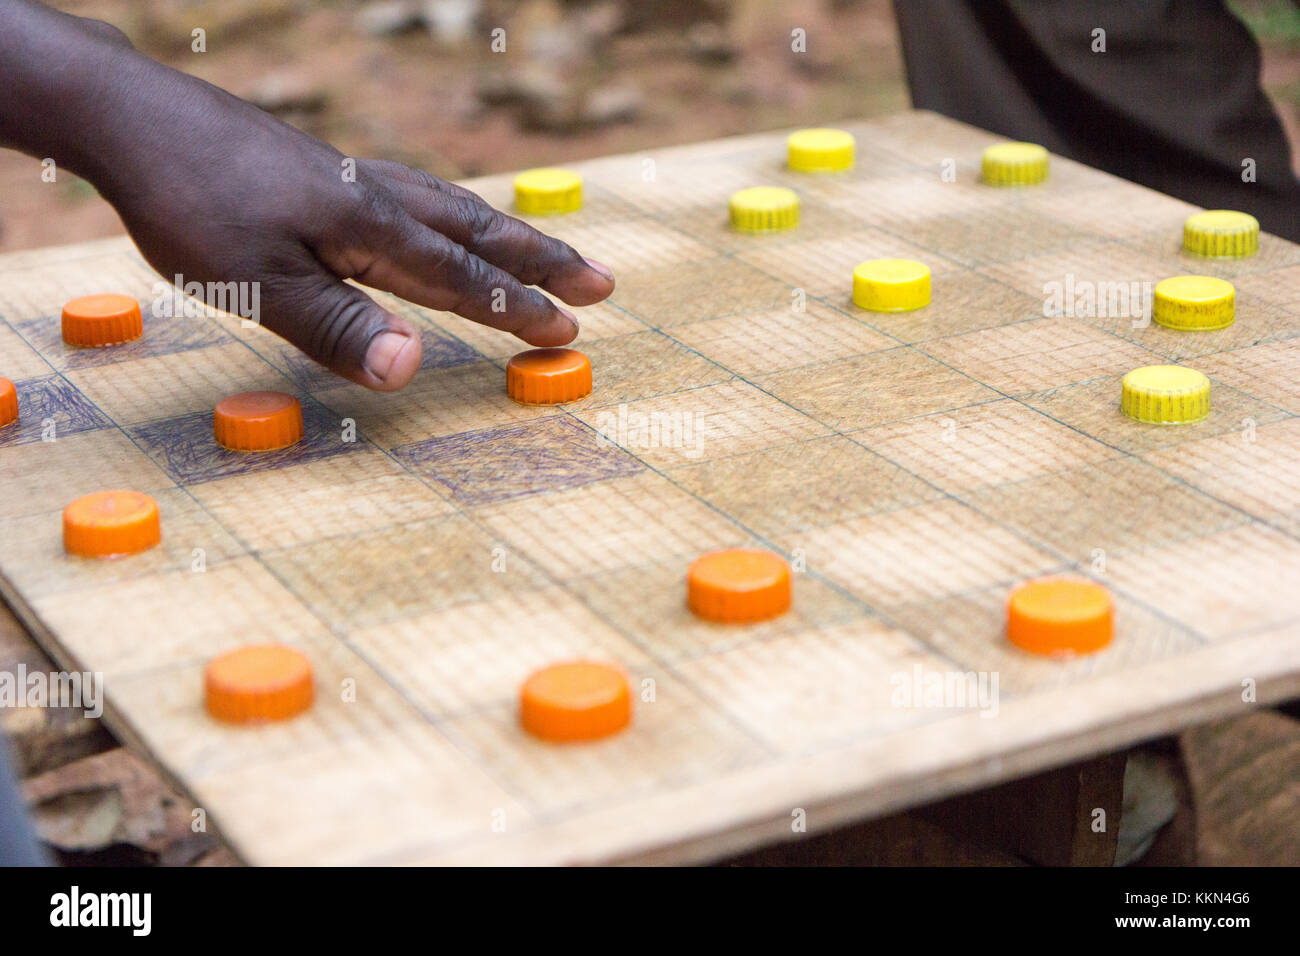 Ugandan men playing draughts (checkers) with plastic bottle lids serving as pieces. Stock Photo